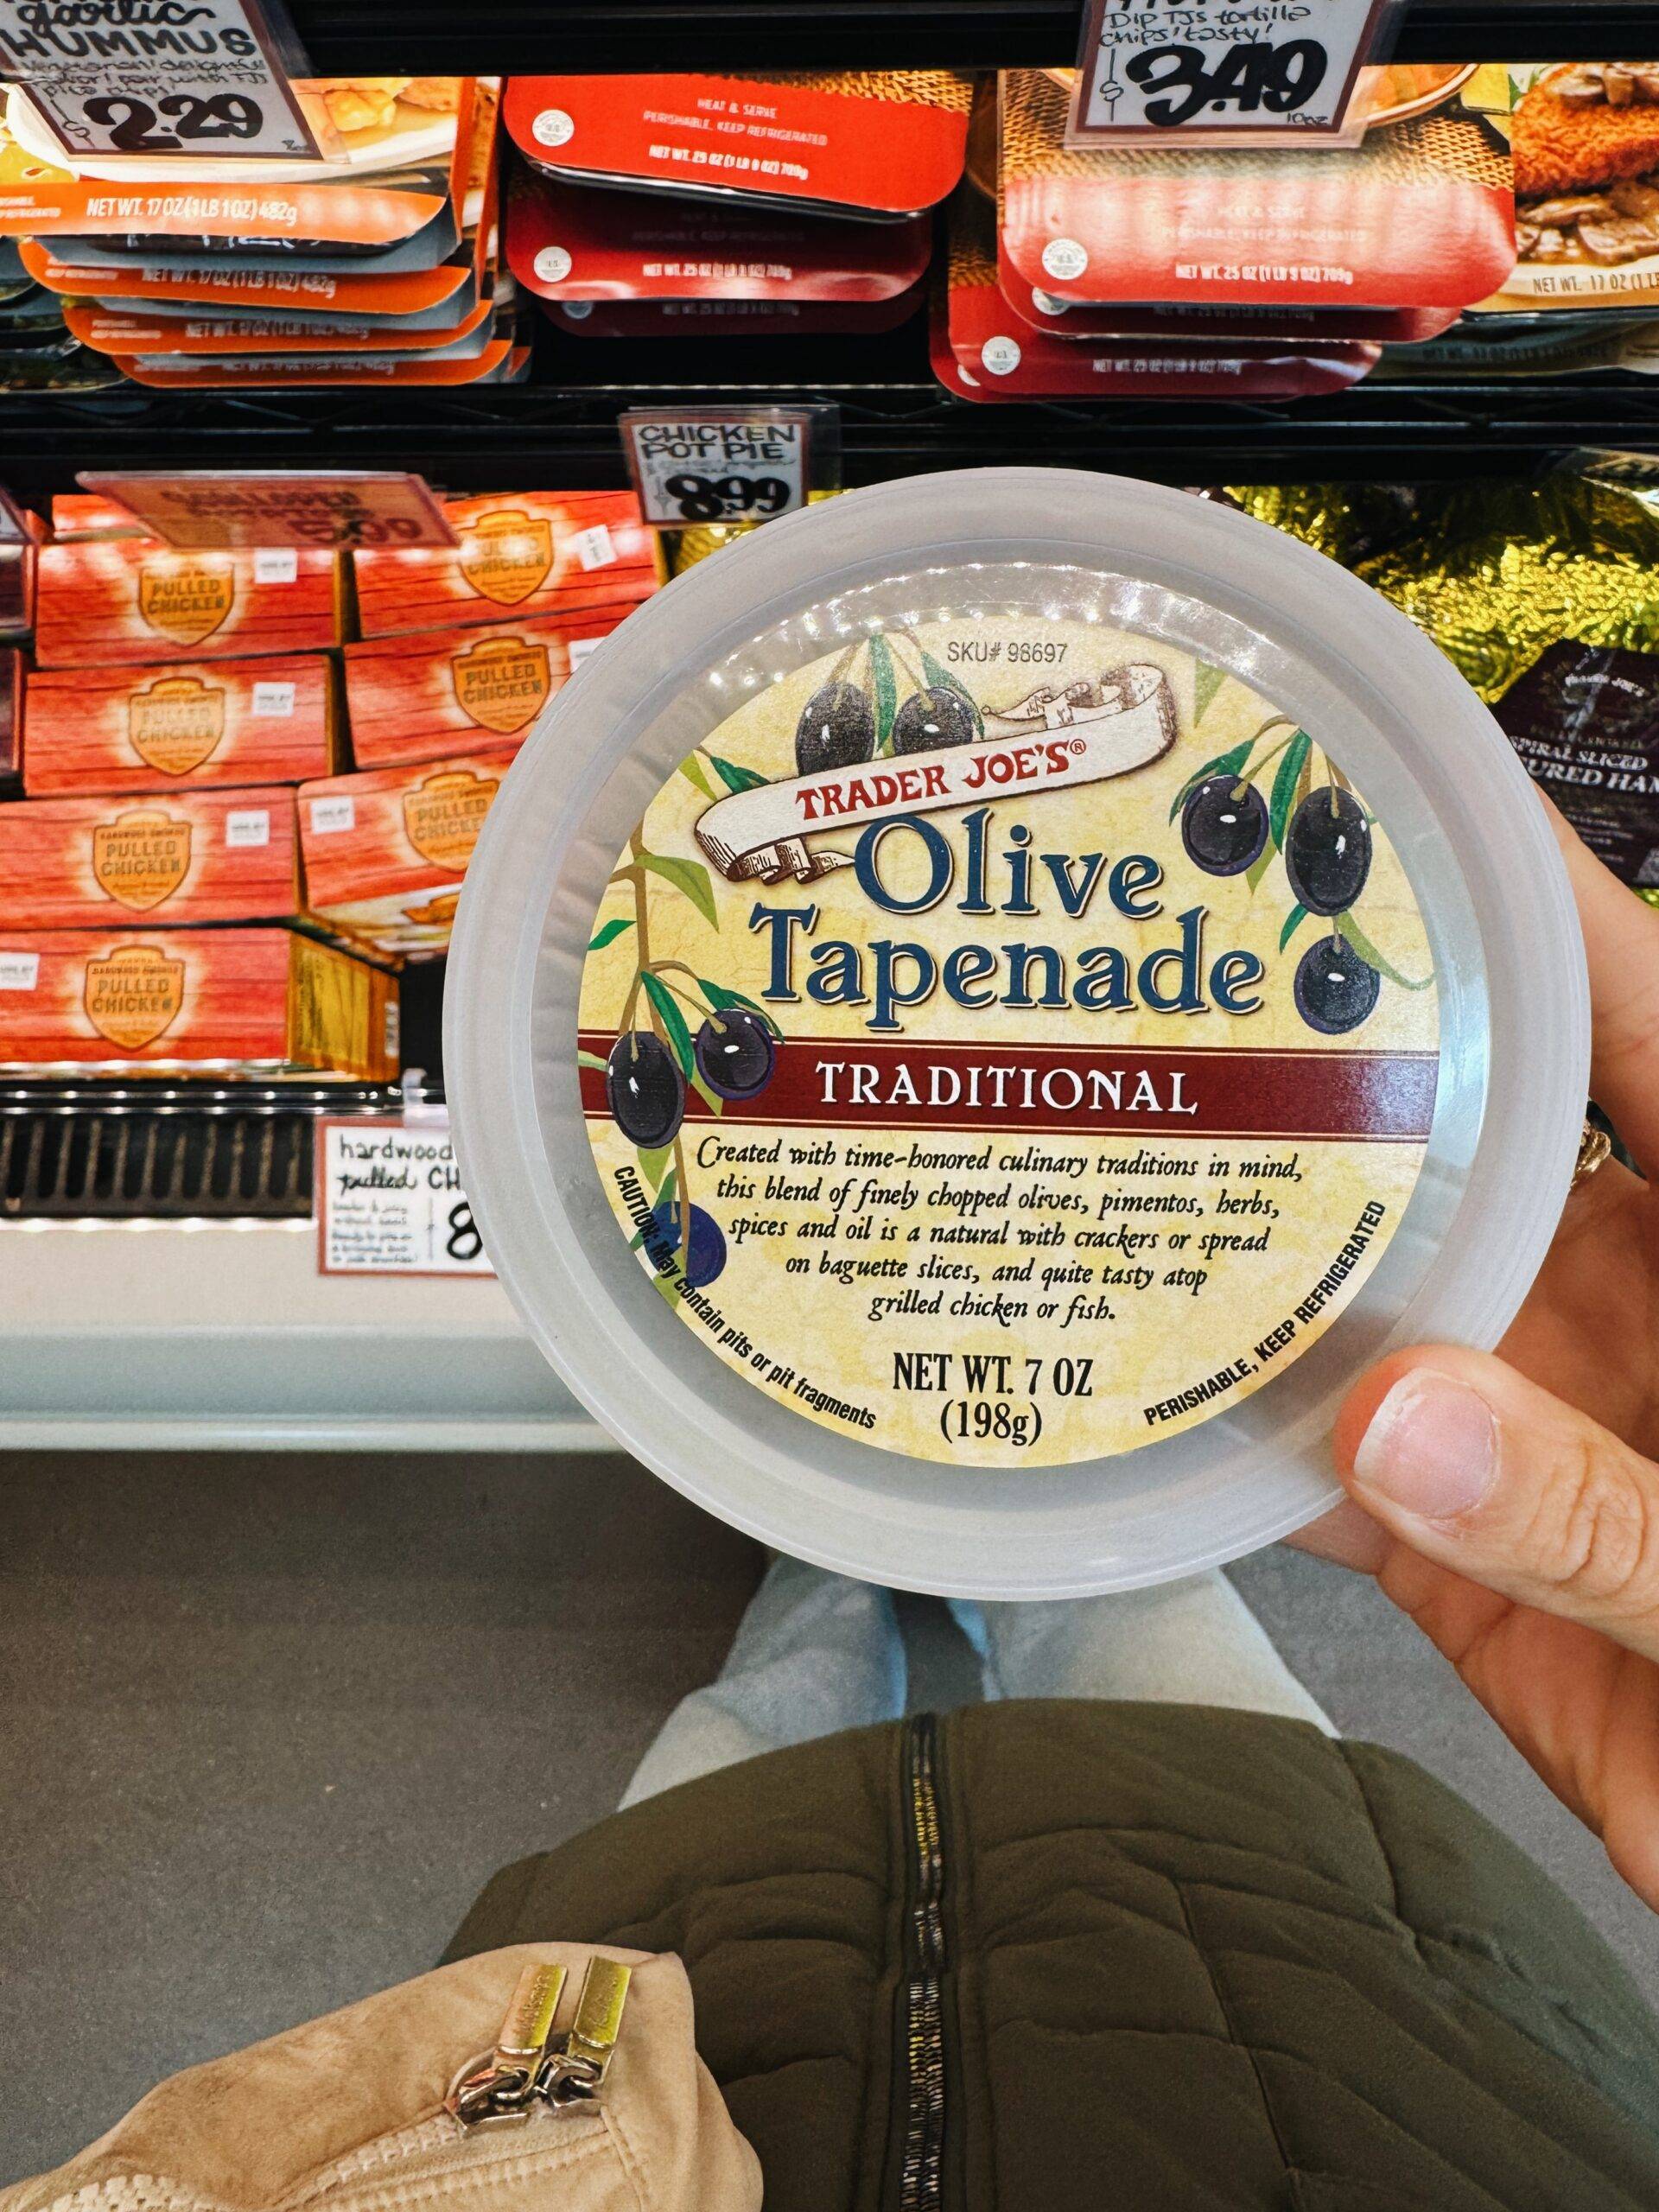 Container of traditional olive tapenade.